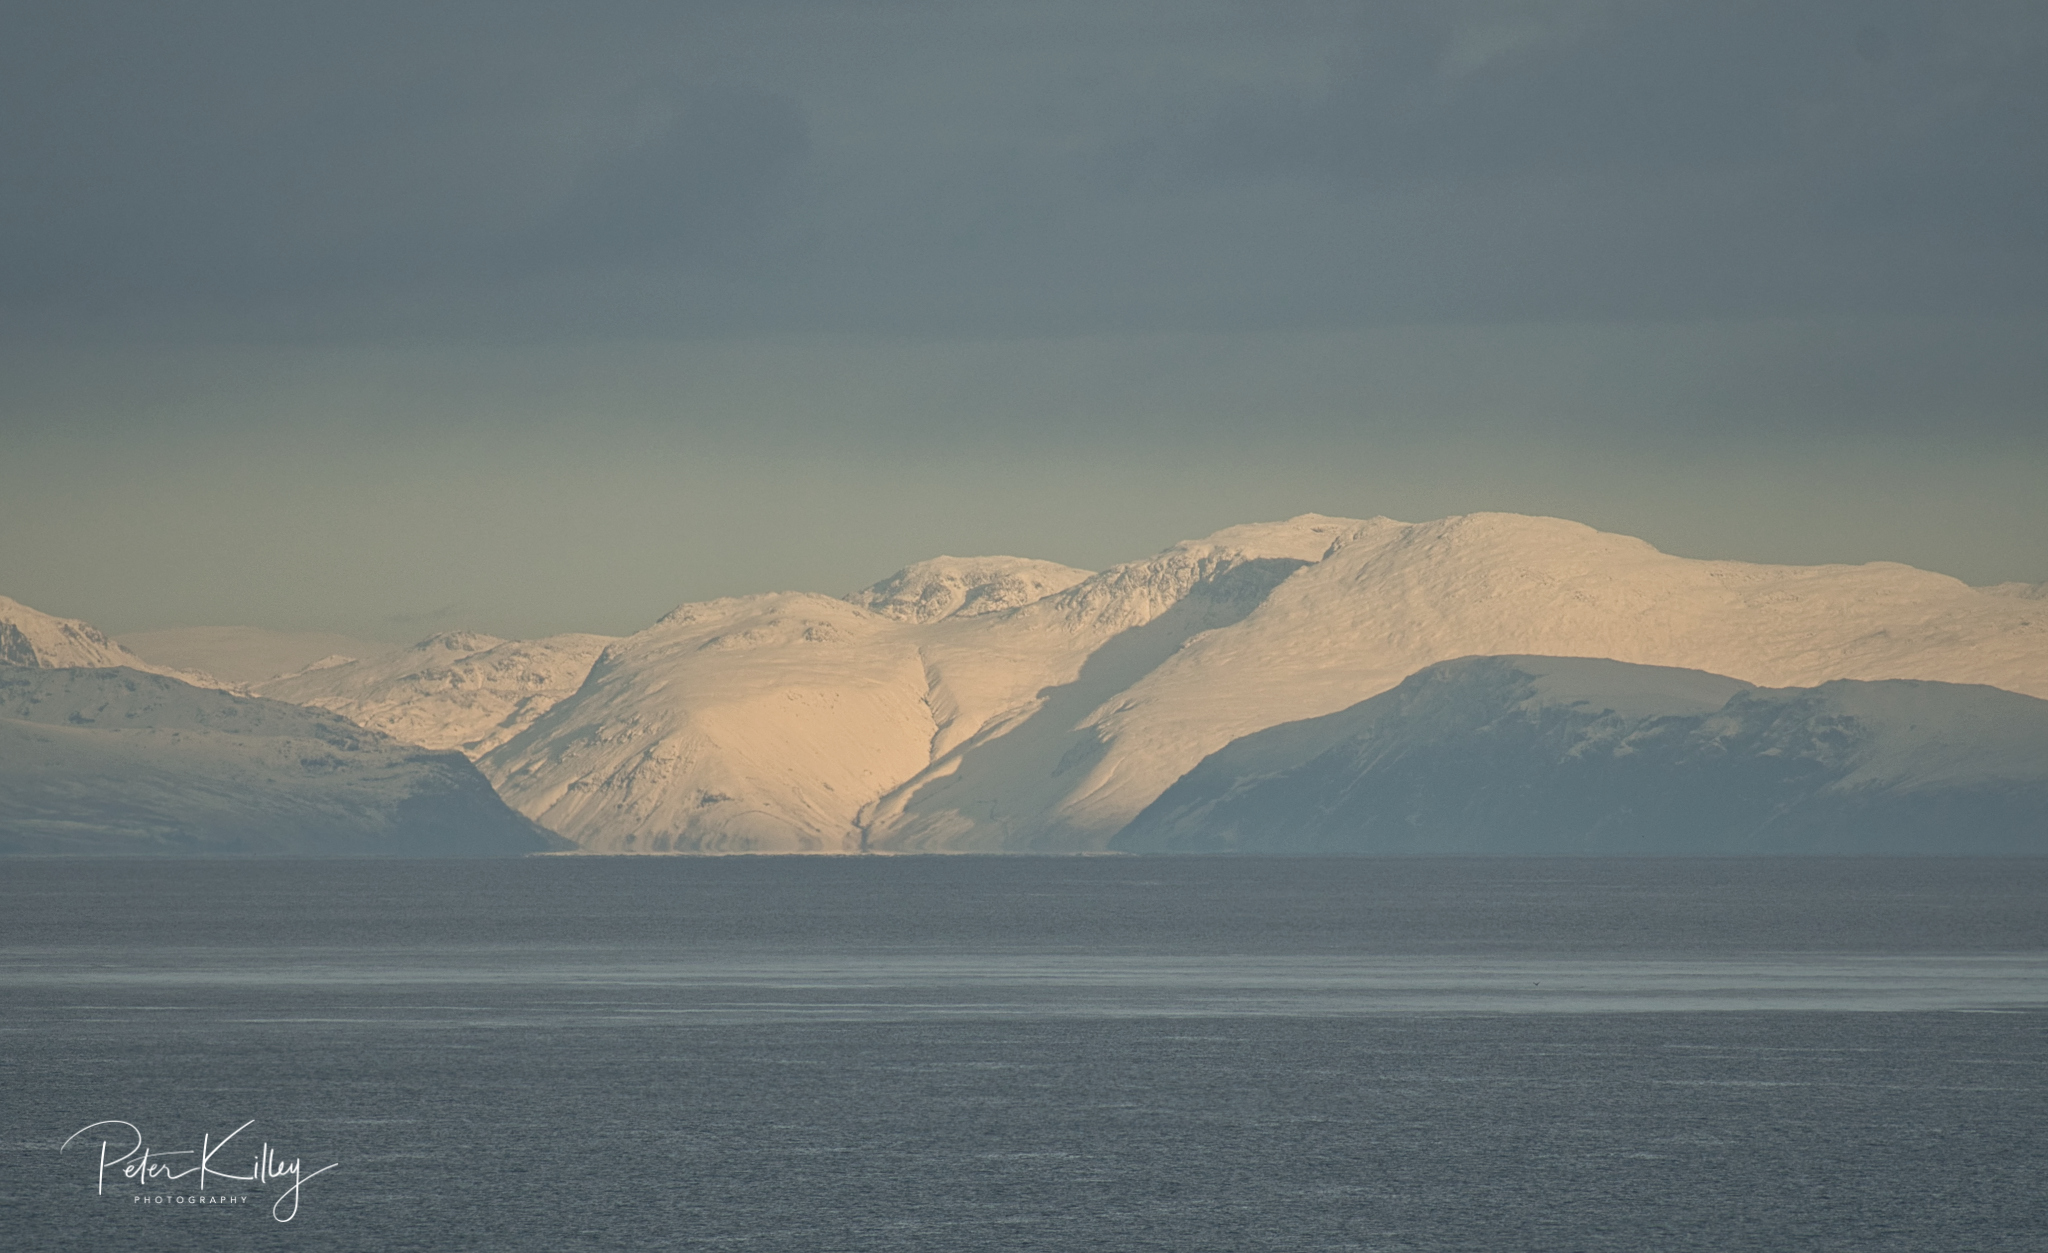 Cumbrian Mountains from IOM - © Peter Killey - www.manxscenes.com